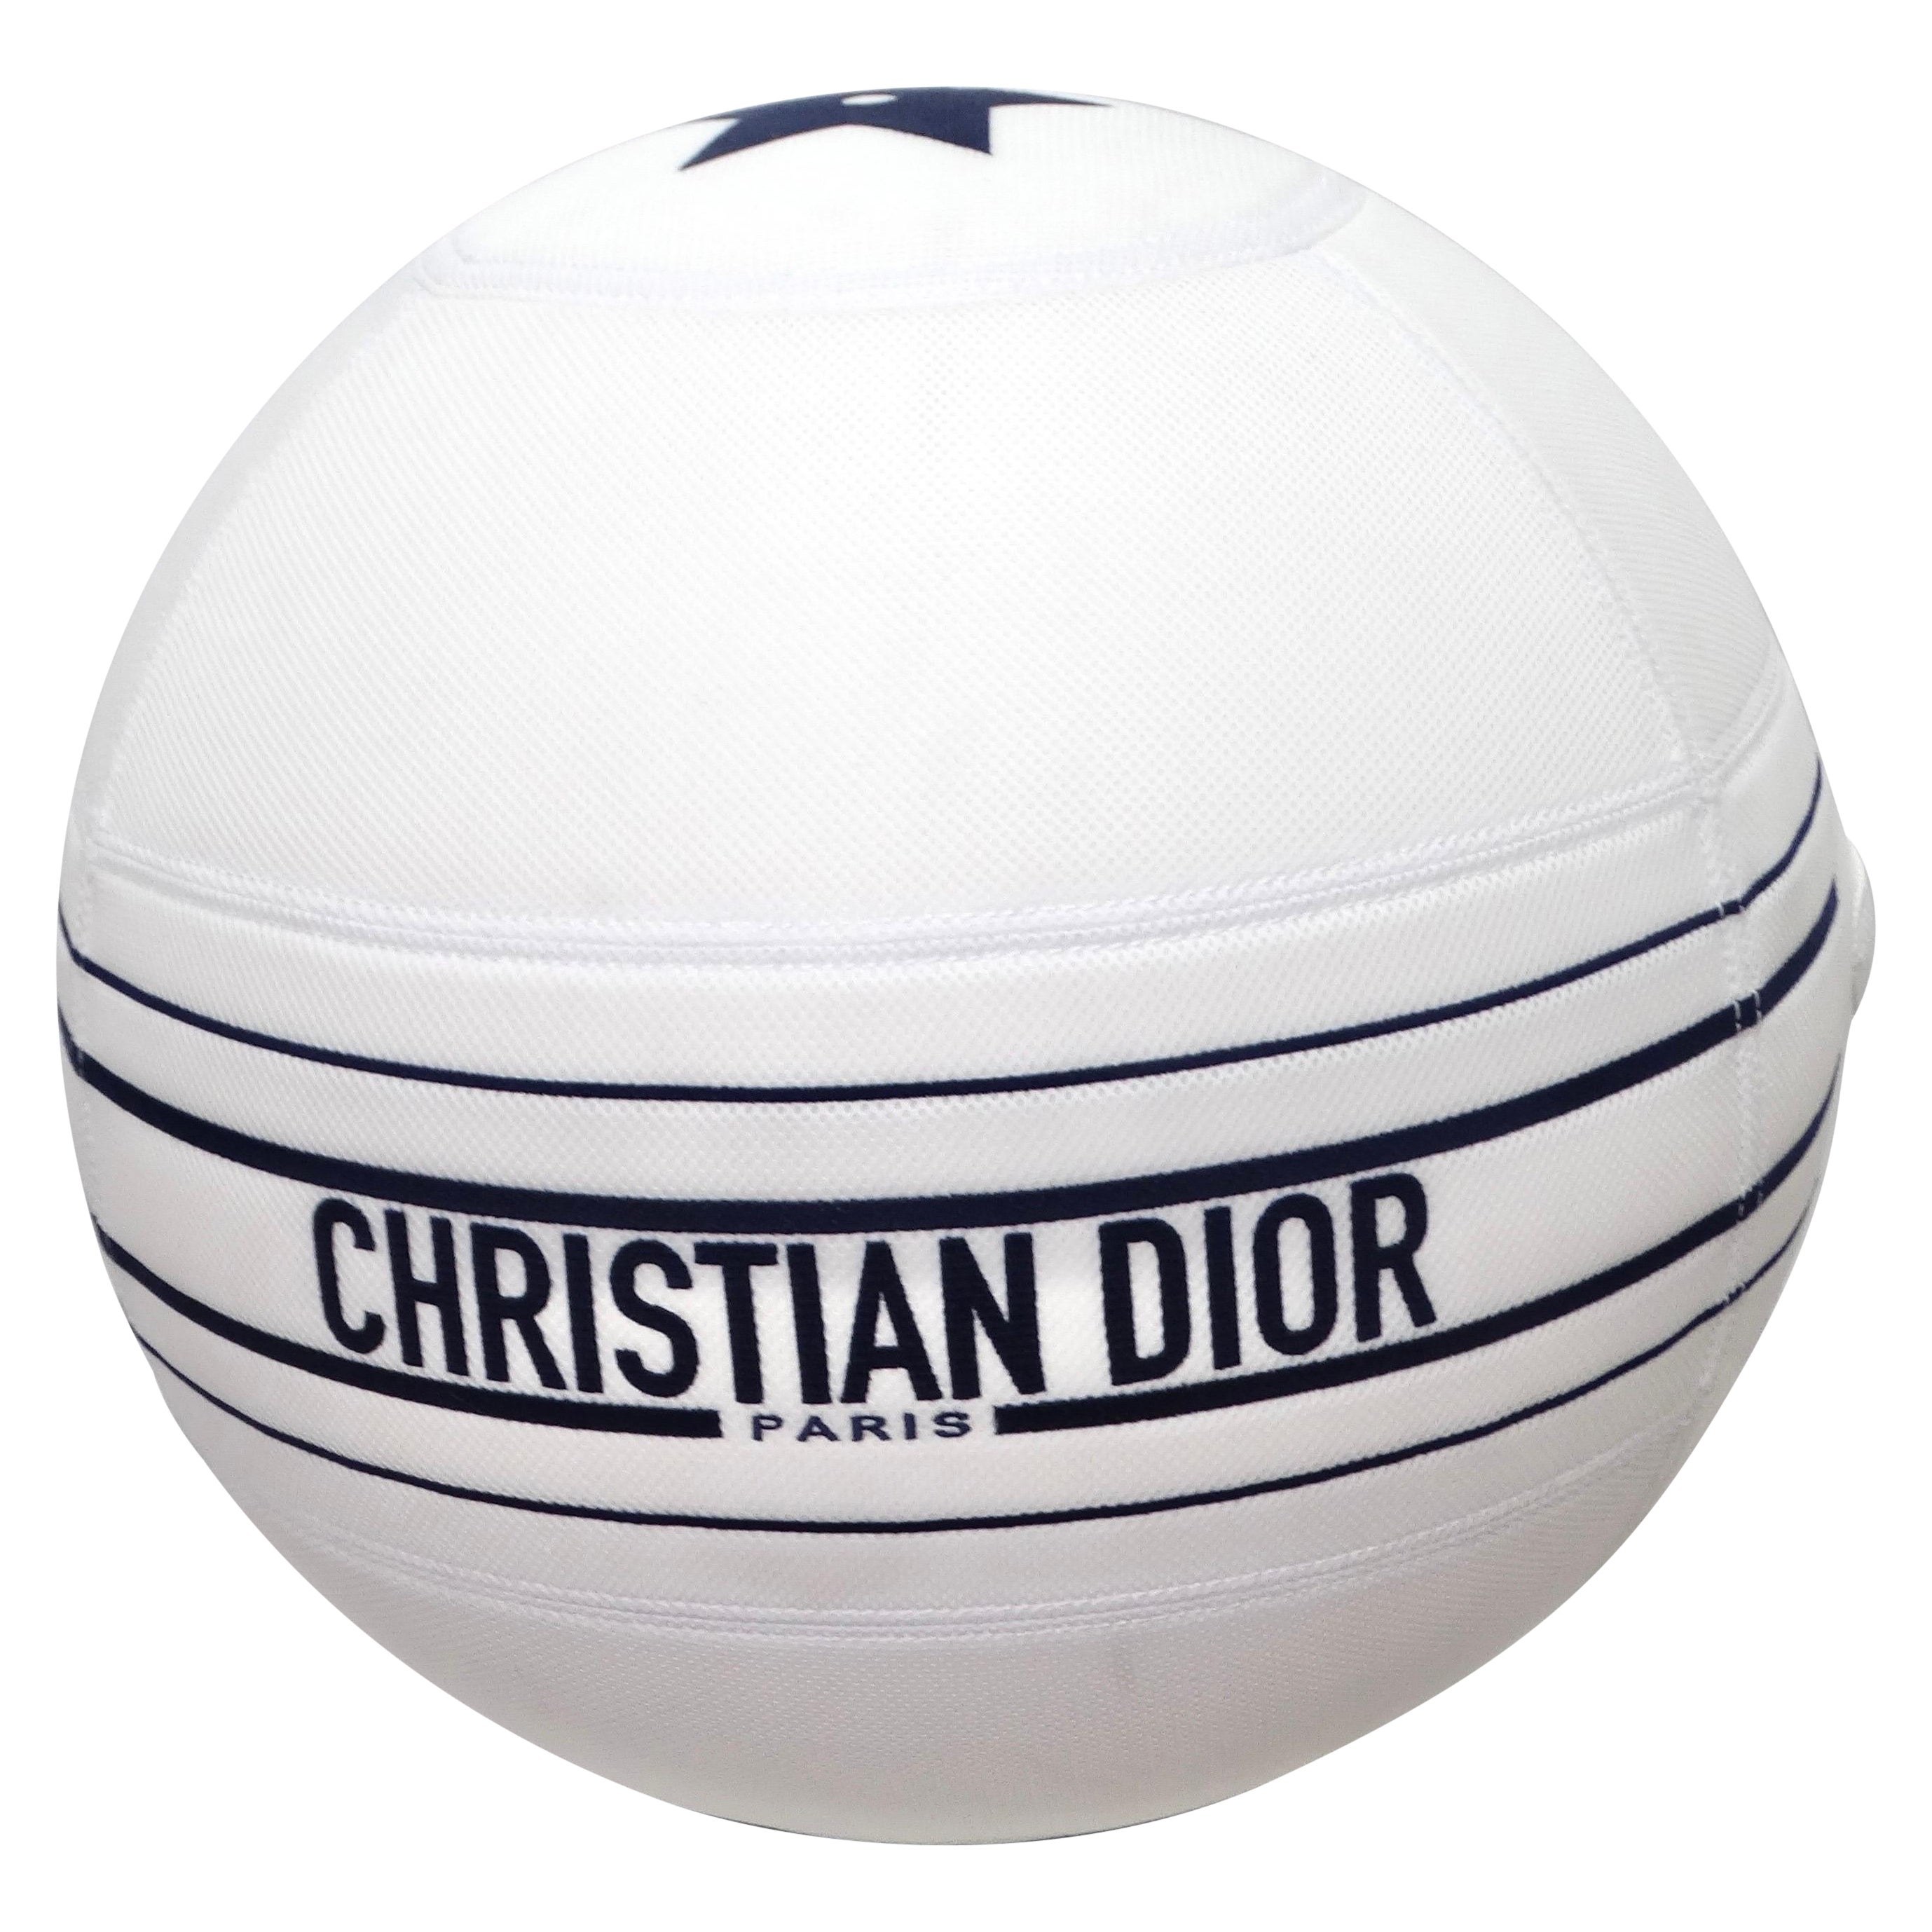 Christian Dior Limited Edition Medicine Ball For Sale